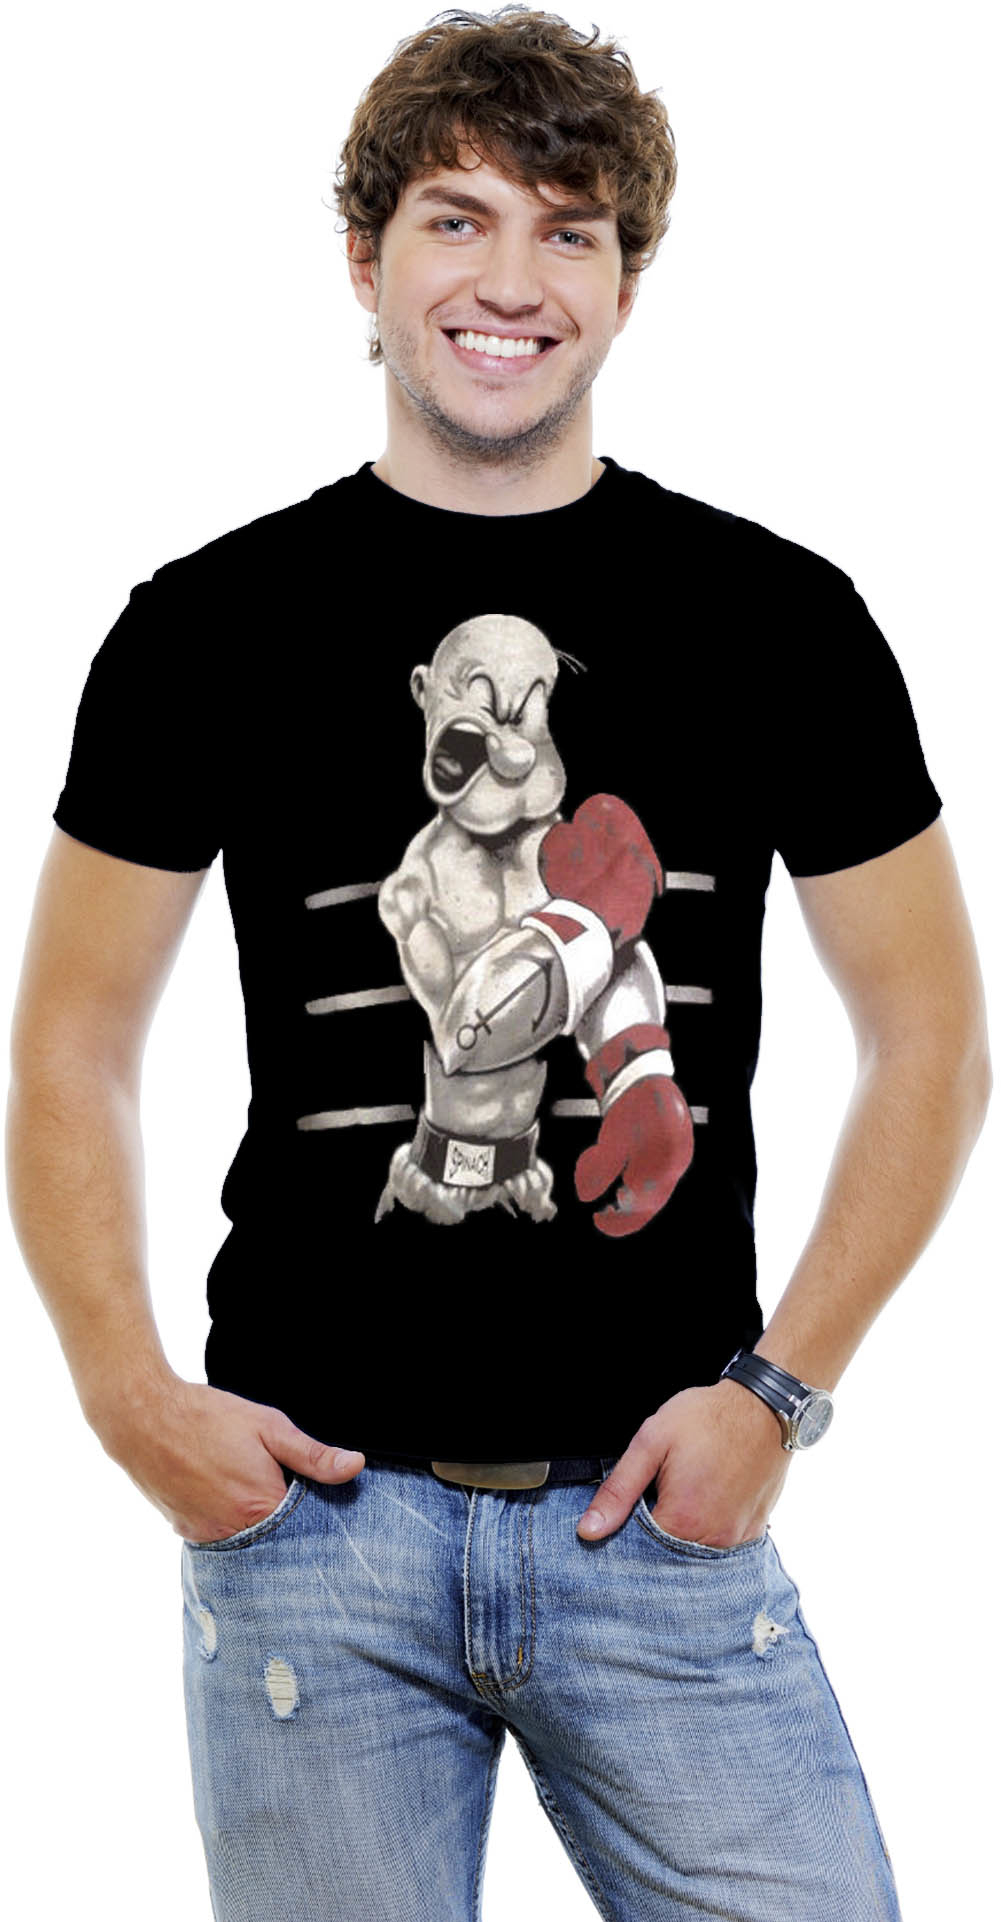 Popeye Boxing T-shirt Sofot Cotton Men's T-Shirts Assorted Colors Sizes S-5XL